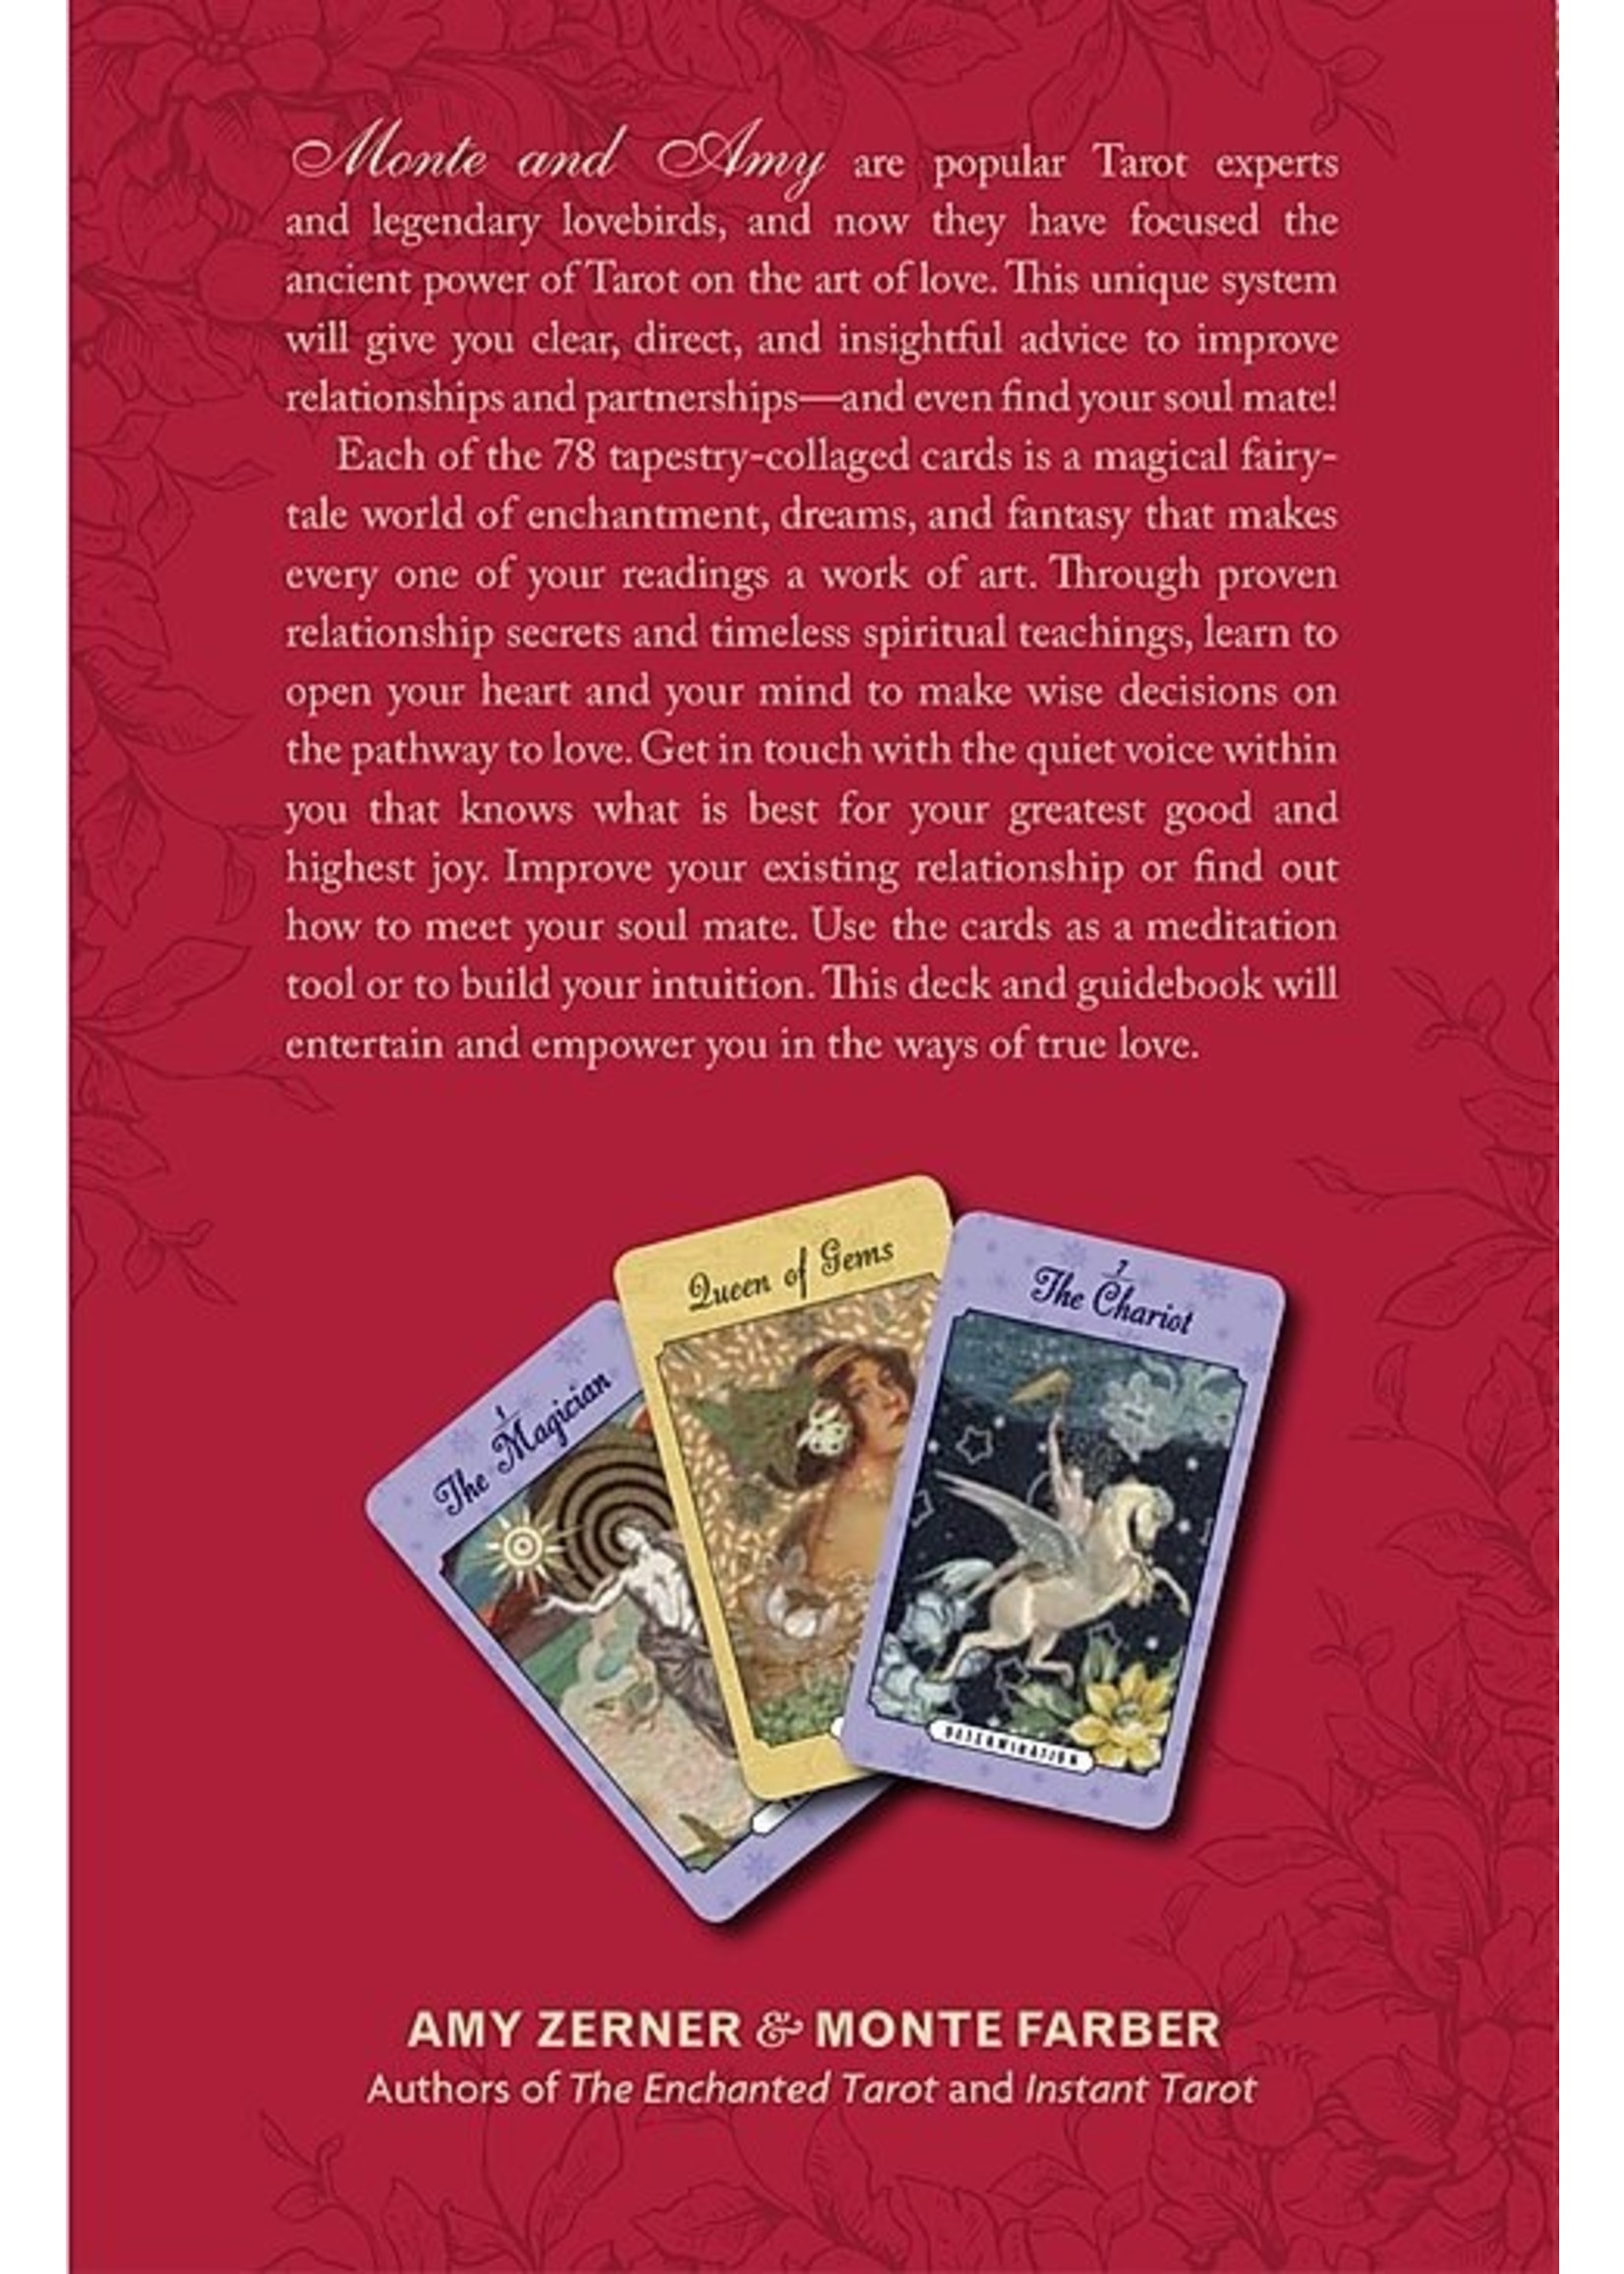 Deck Enchanted Love Tarot: The Lover's Guide to Dating, Mating, and Relating (1ST ed.)